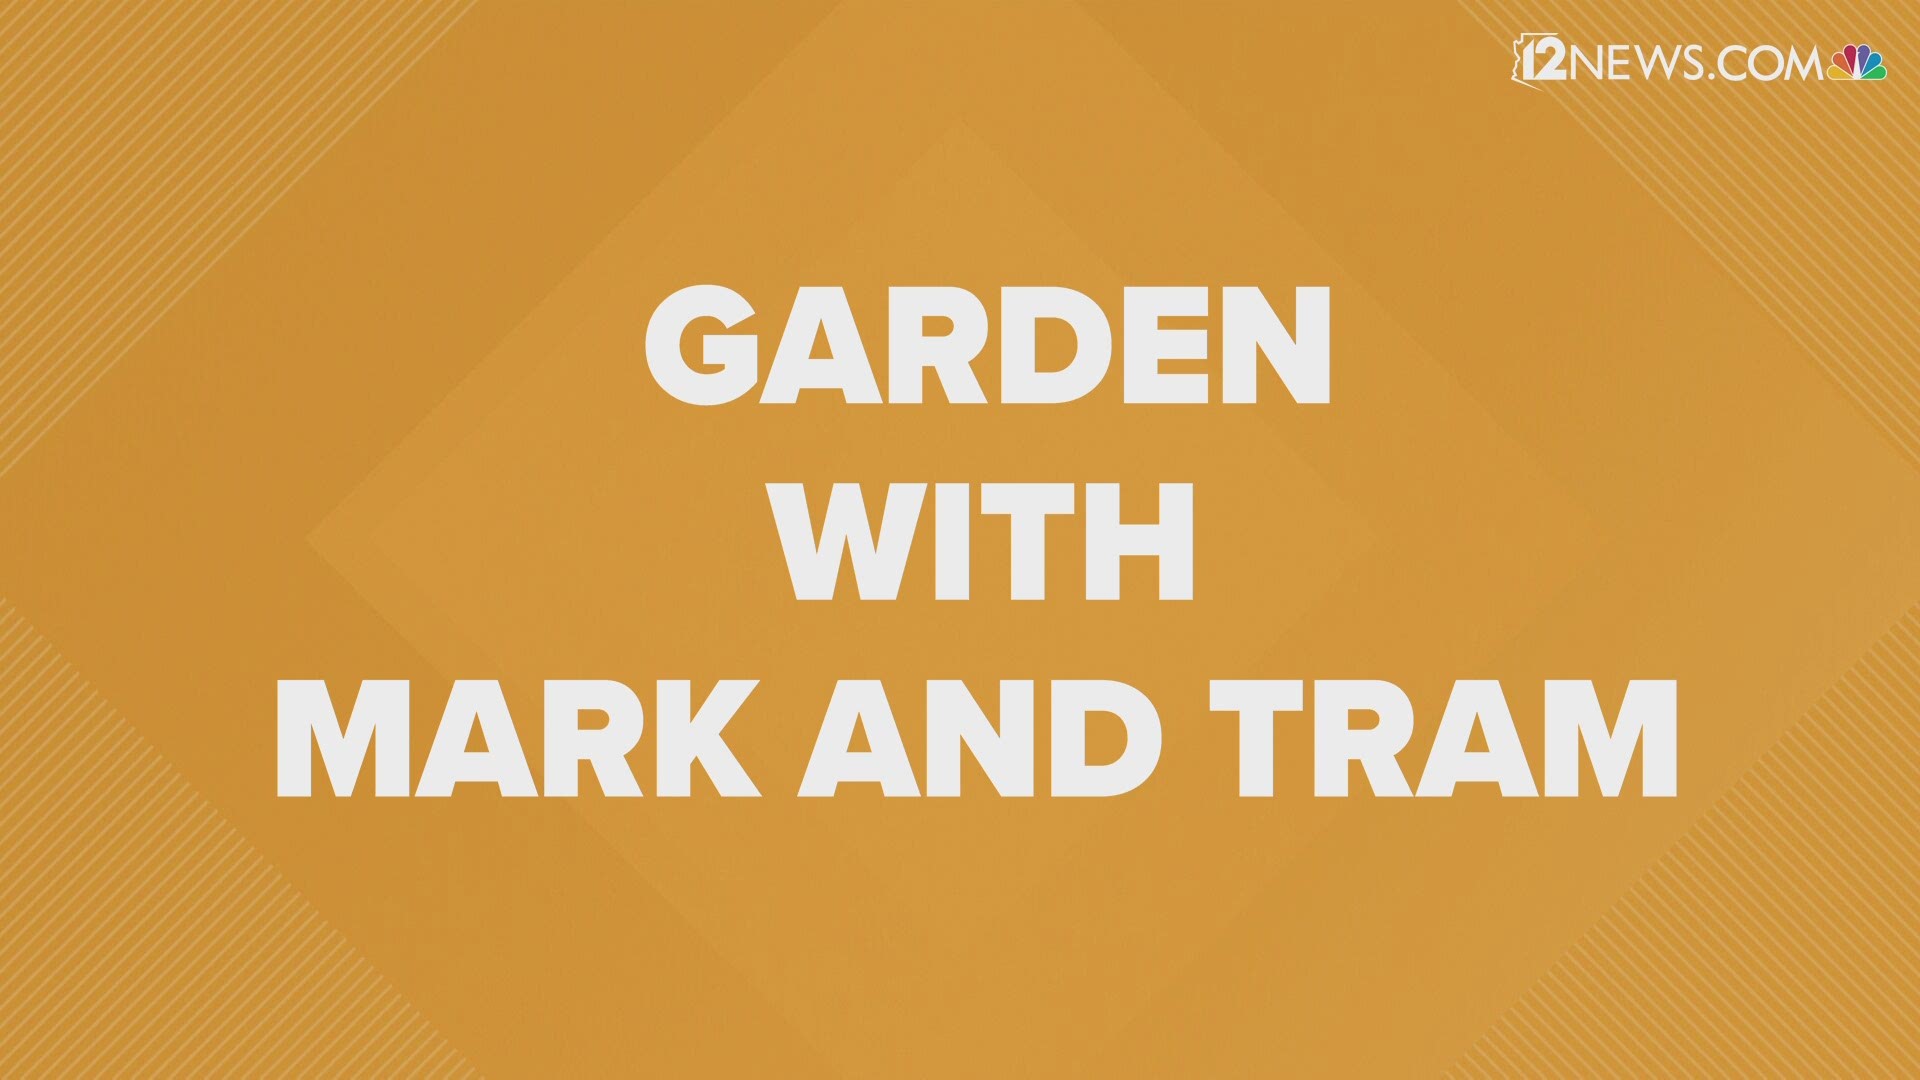 We checked in with our 12 News gardening enthusiasts Mark Curtis and Tram Mai for some tips to help you get started.